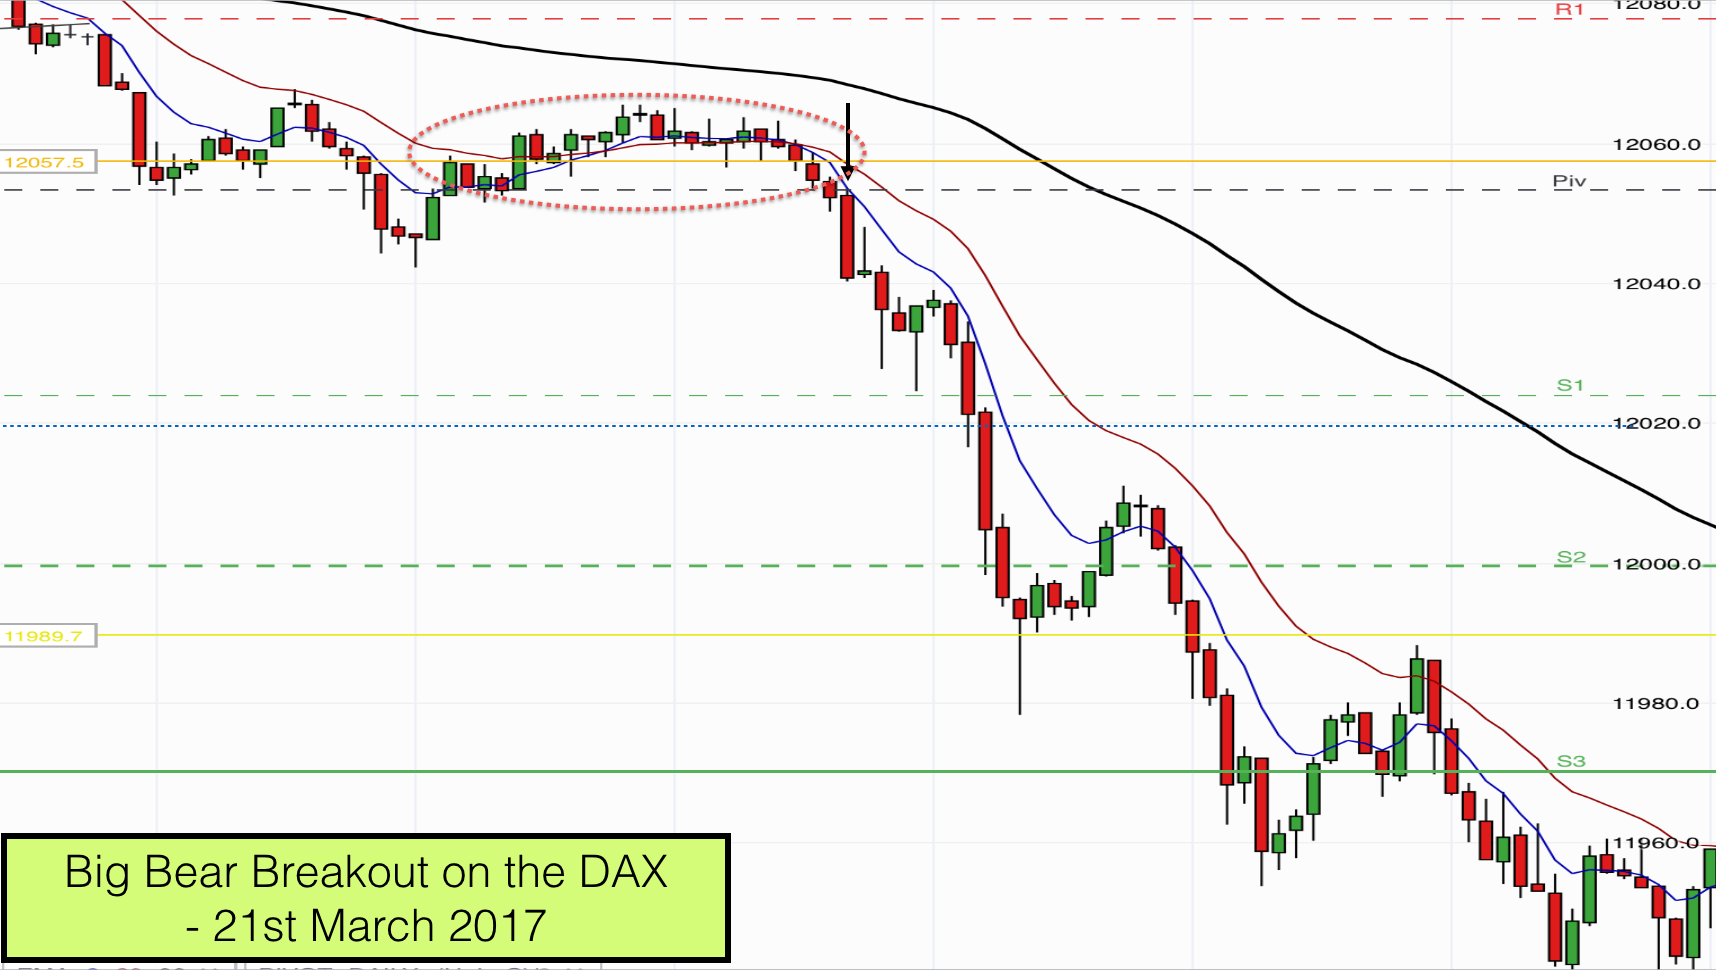 Big Bear breakout & trend on the DAX - 21st March 2017